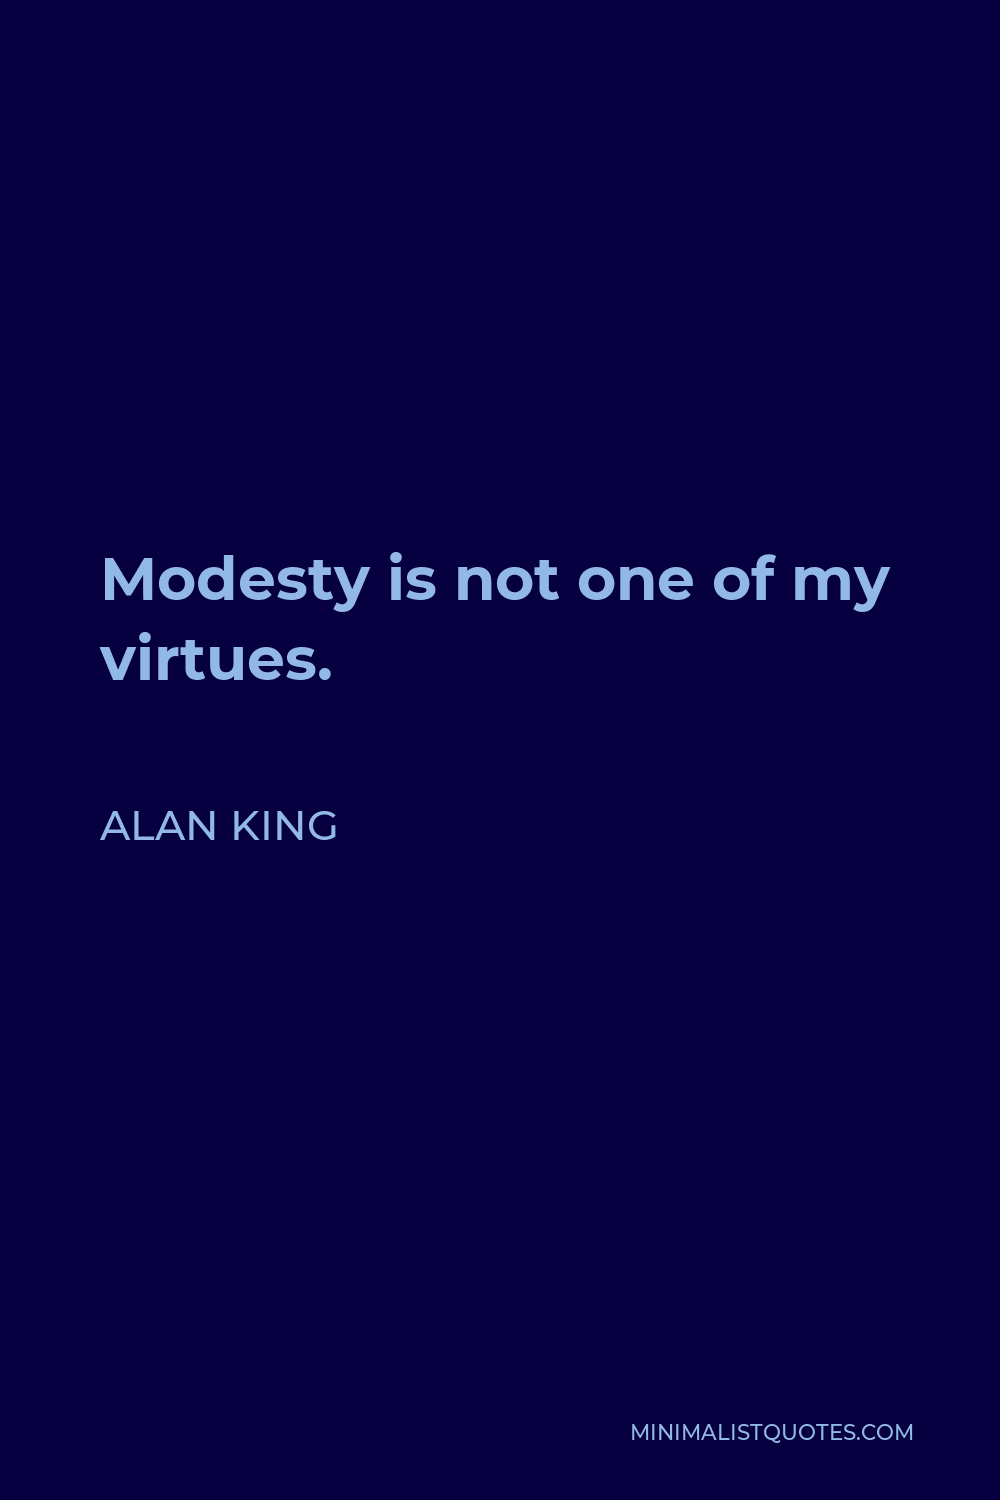 Alan King Quote - Modesty is not one of my virtues.